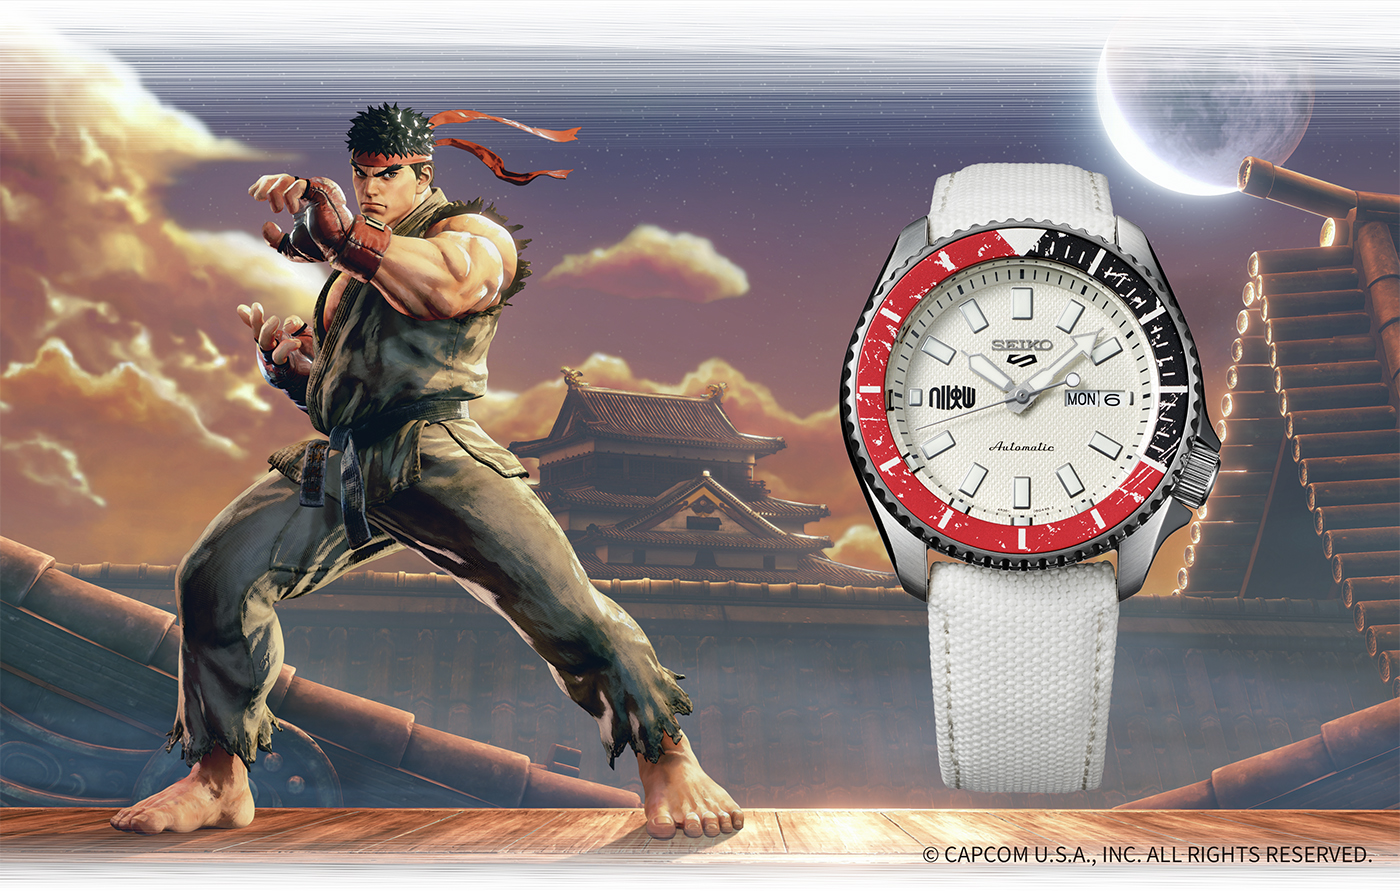 Seiko Partners With Fighter” Series For Six Limited-Edition Models | aBlogtoWatch